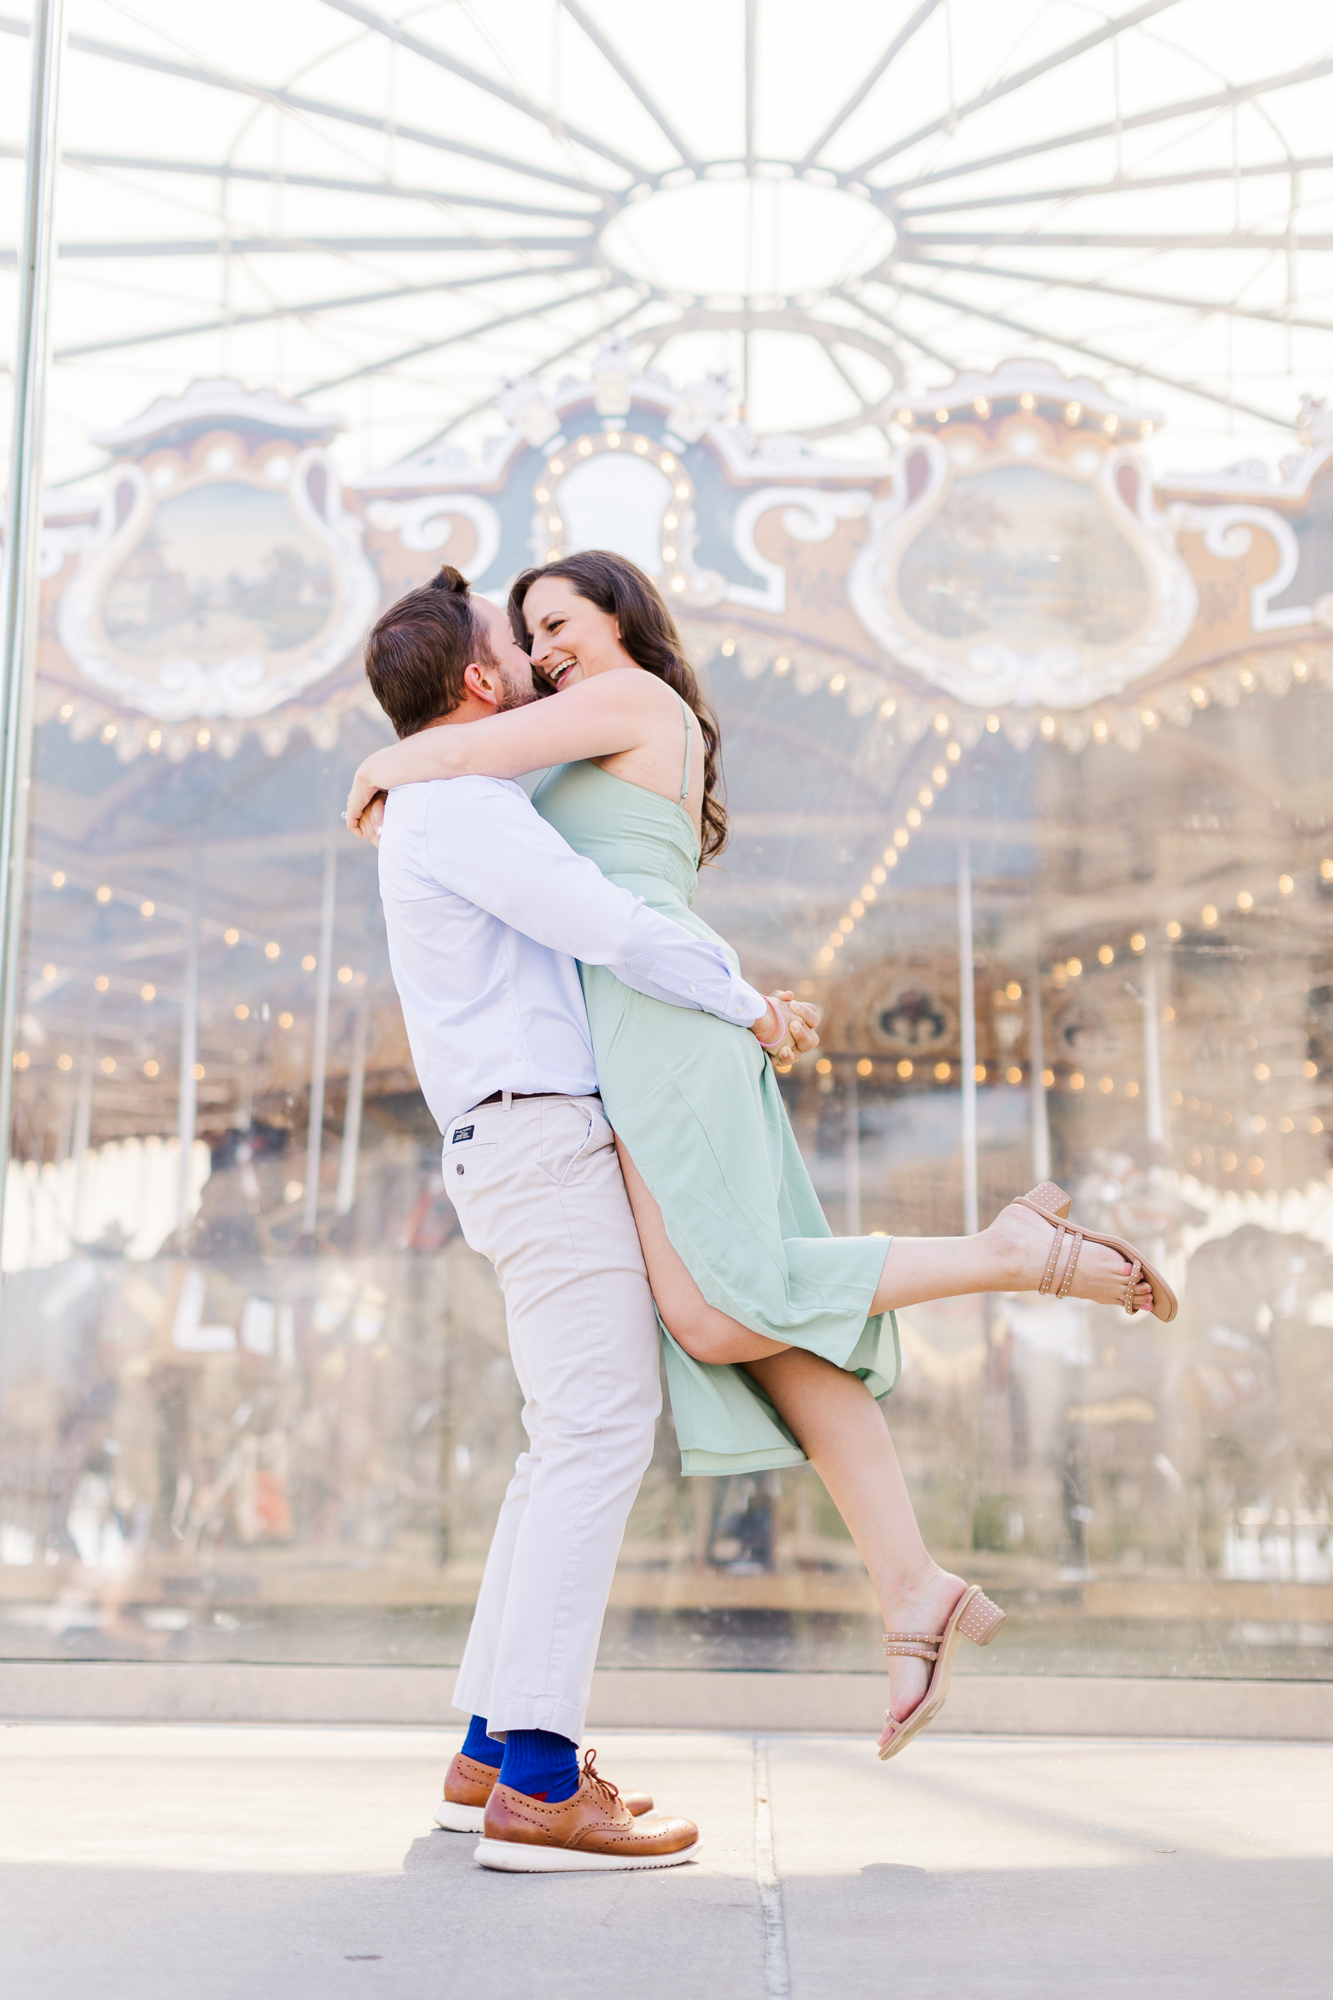 Candid DUMBO Engagement Session in New York